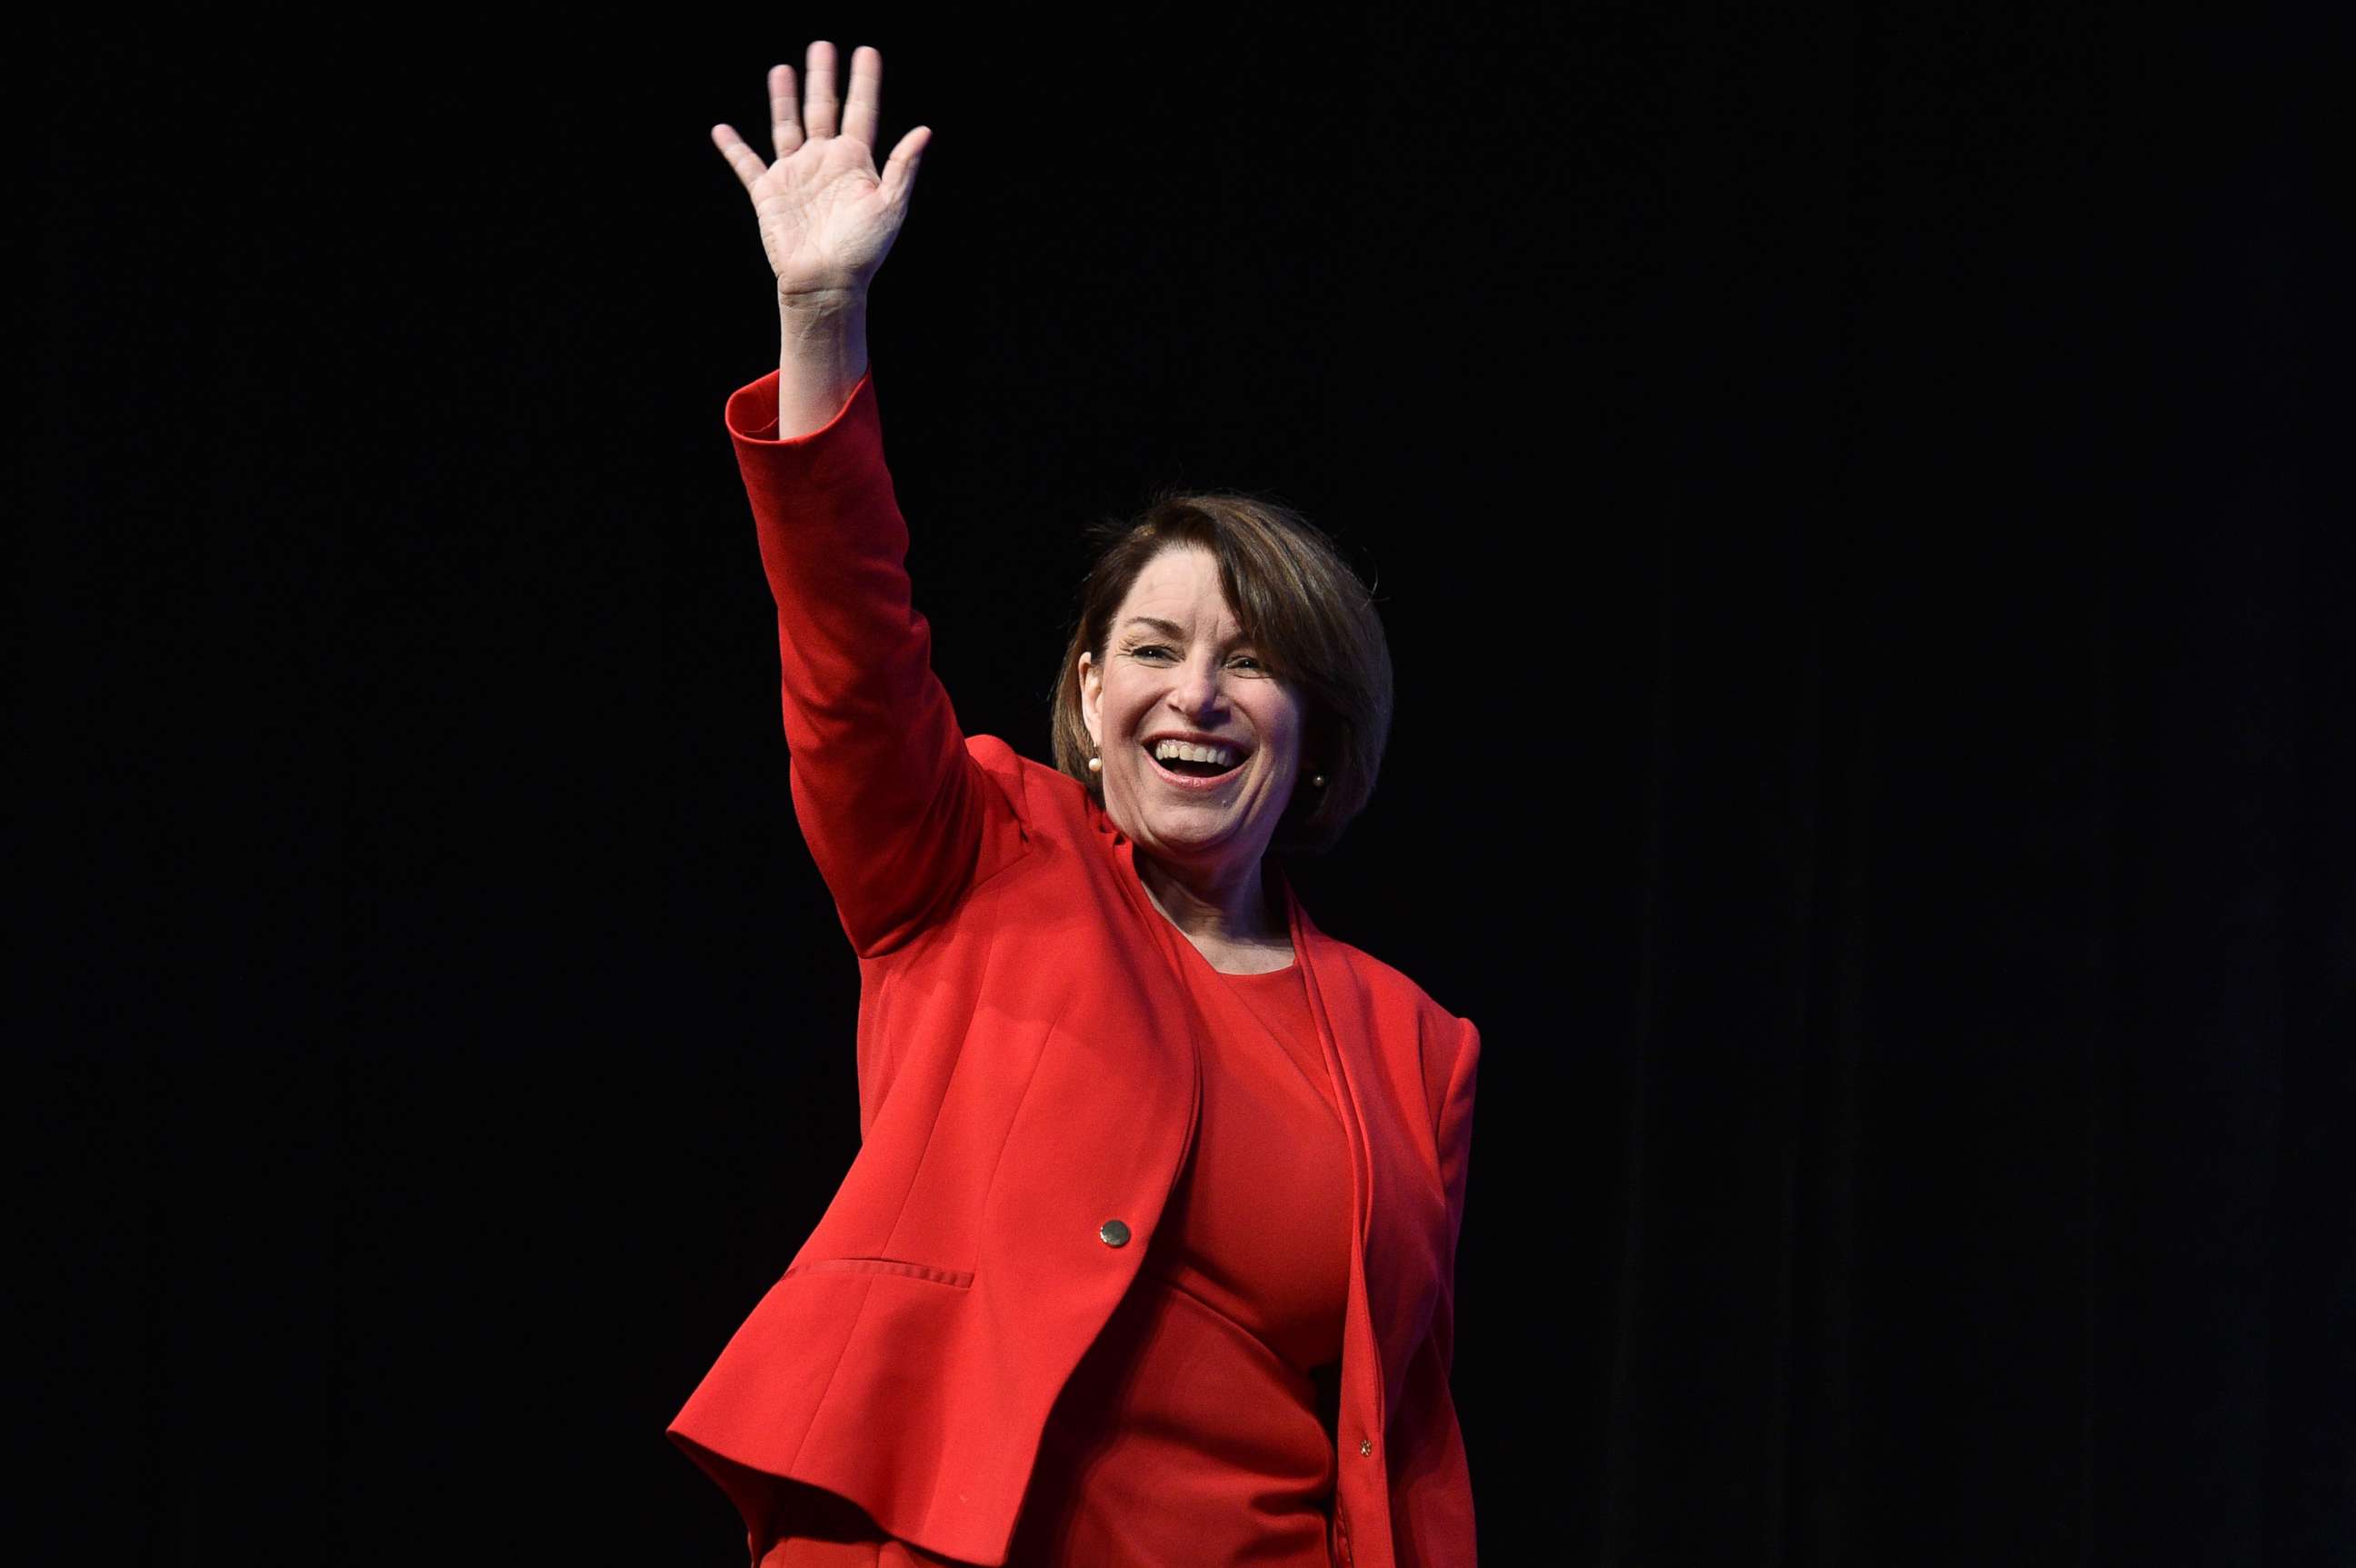 PHOTO: Democratic presidential candidate, U.S. Sen. Amy Klobuchar (D-MN) speaks during the Nevada Democrats' "First in the West" event at Bellagio Resort & Casino on November 17, 2019 in Las Vegas, Nevada.